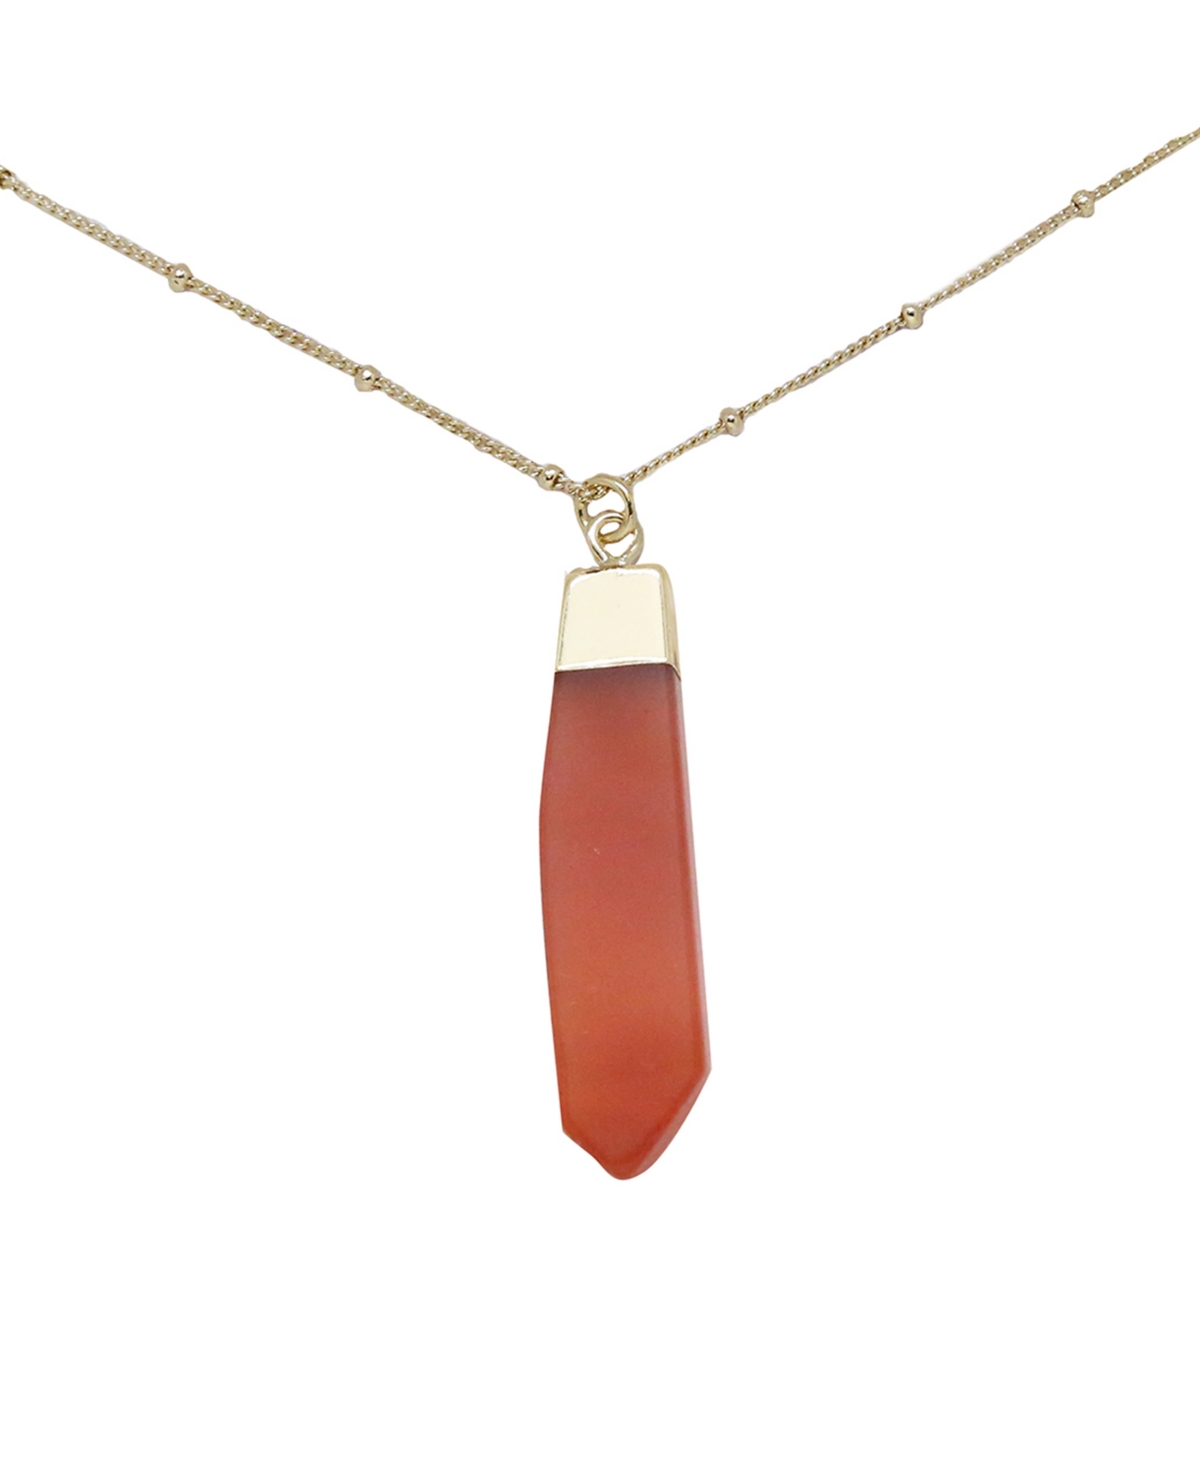 Charged Carnelian Pendant Necklace